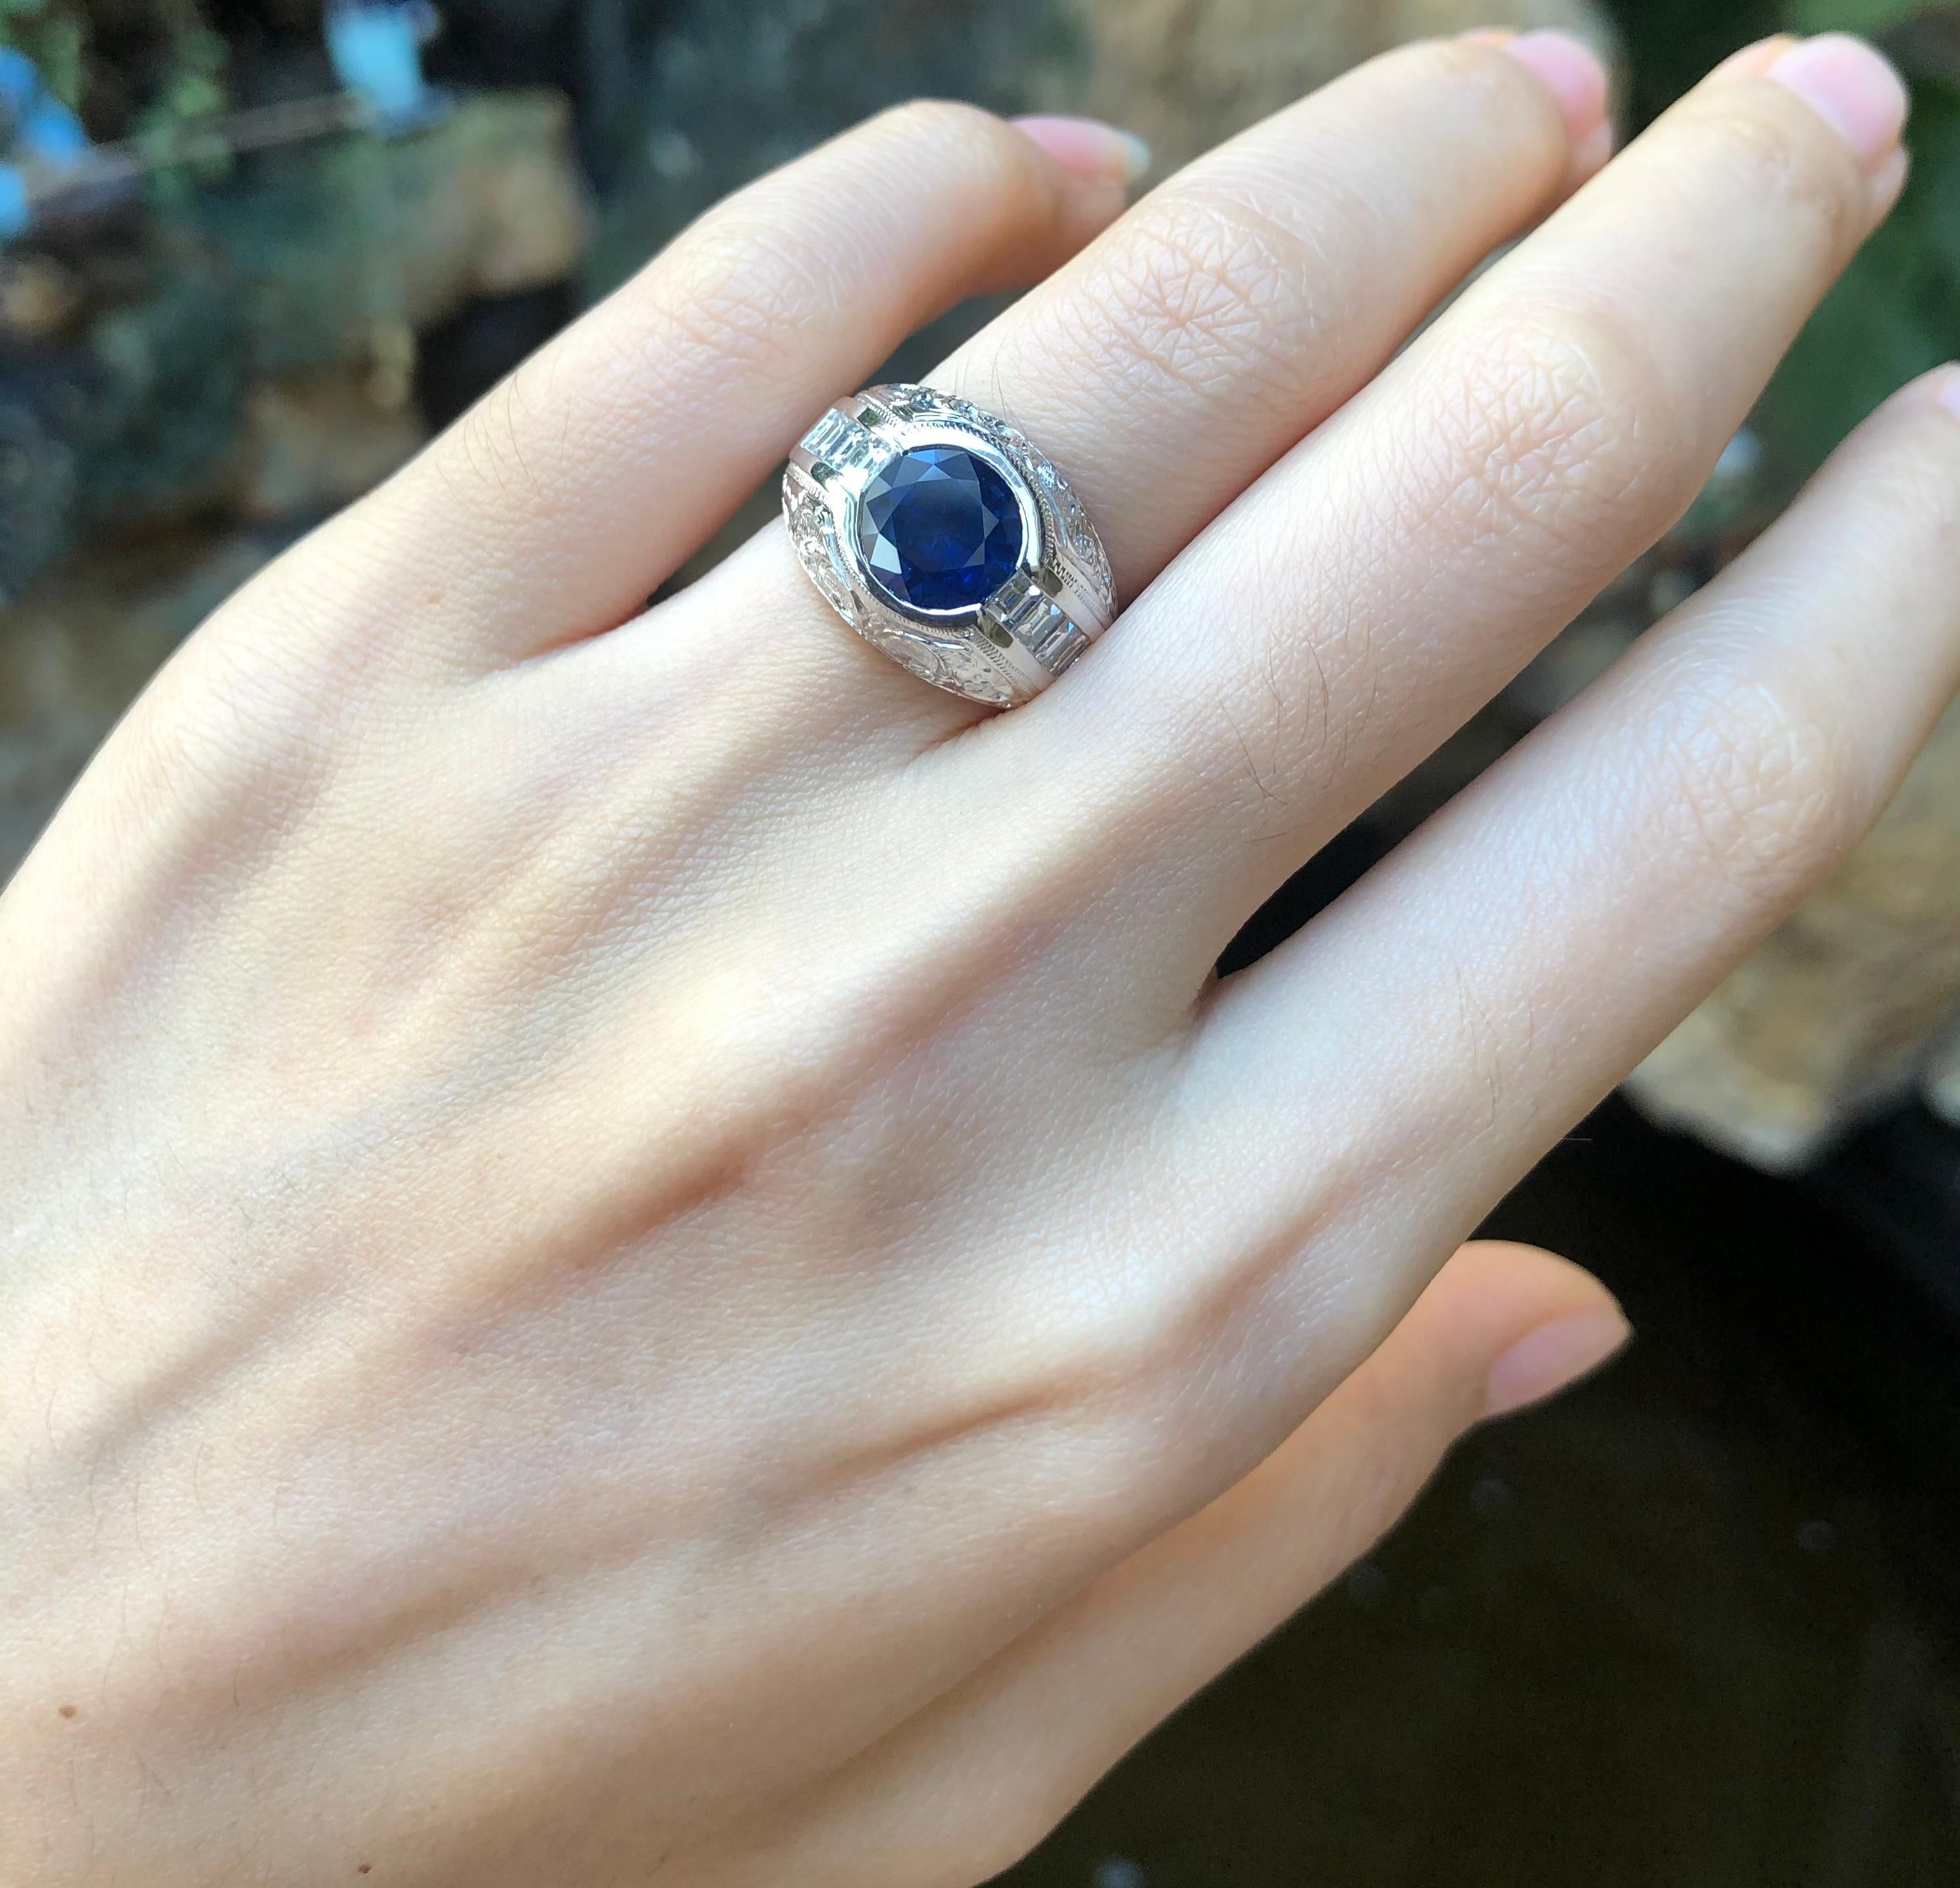 Art Deco Round Cut Blue Sapphire, Diamond with Engraving Ring Set in Platinum 950 For Sale